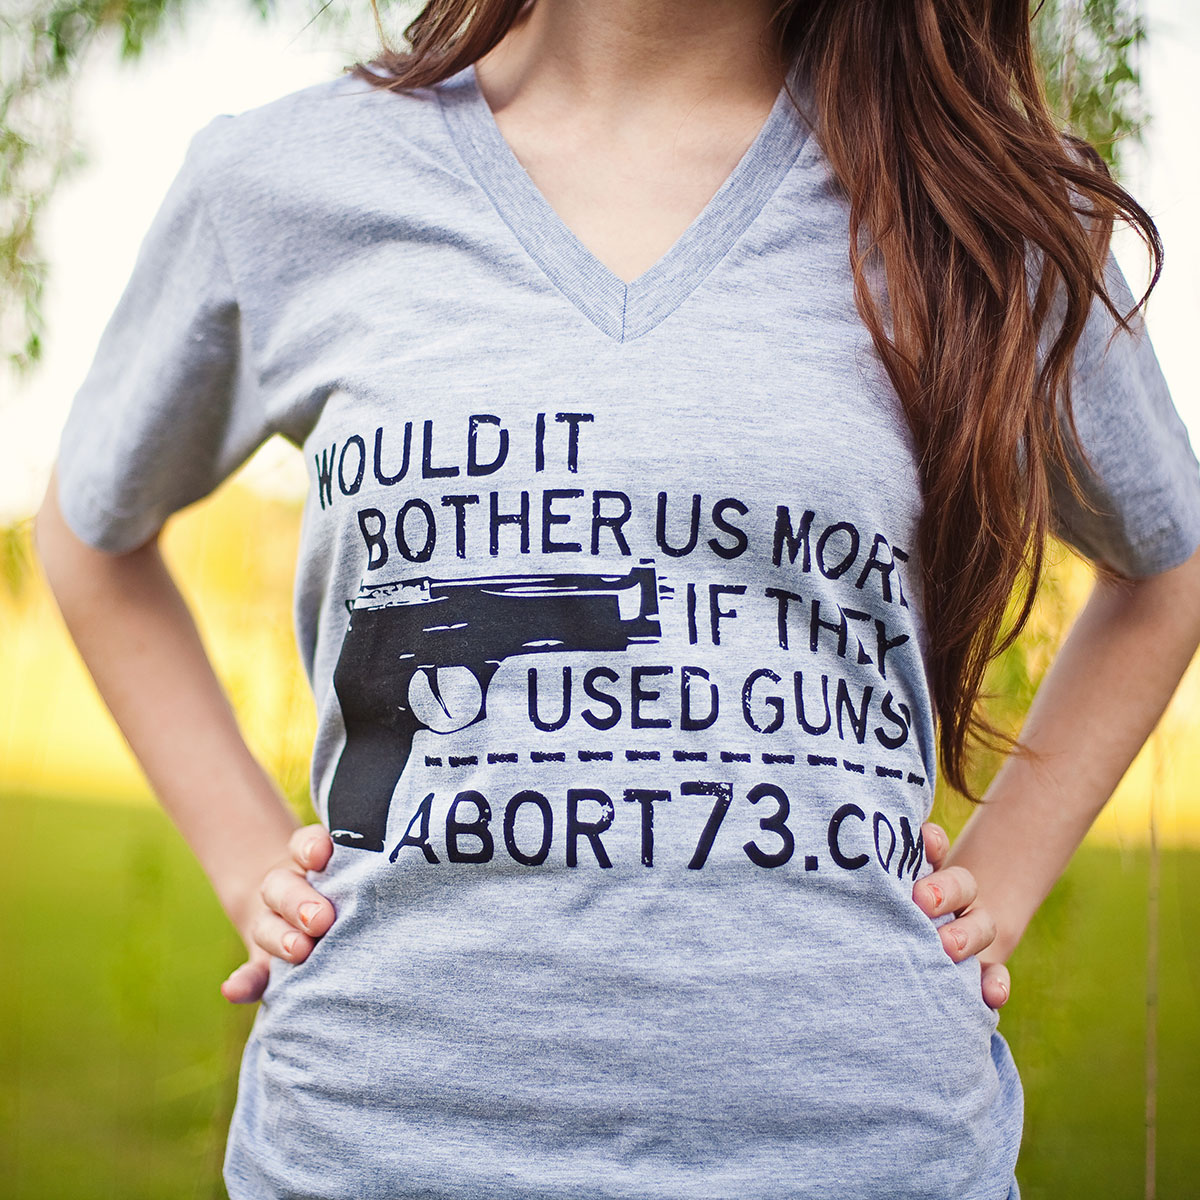 Would it Bother Us More if They Used Guns? (Abort73 Unisex V-neck)